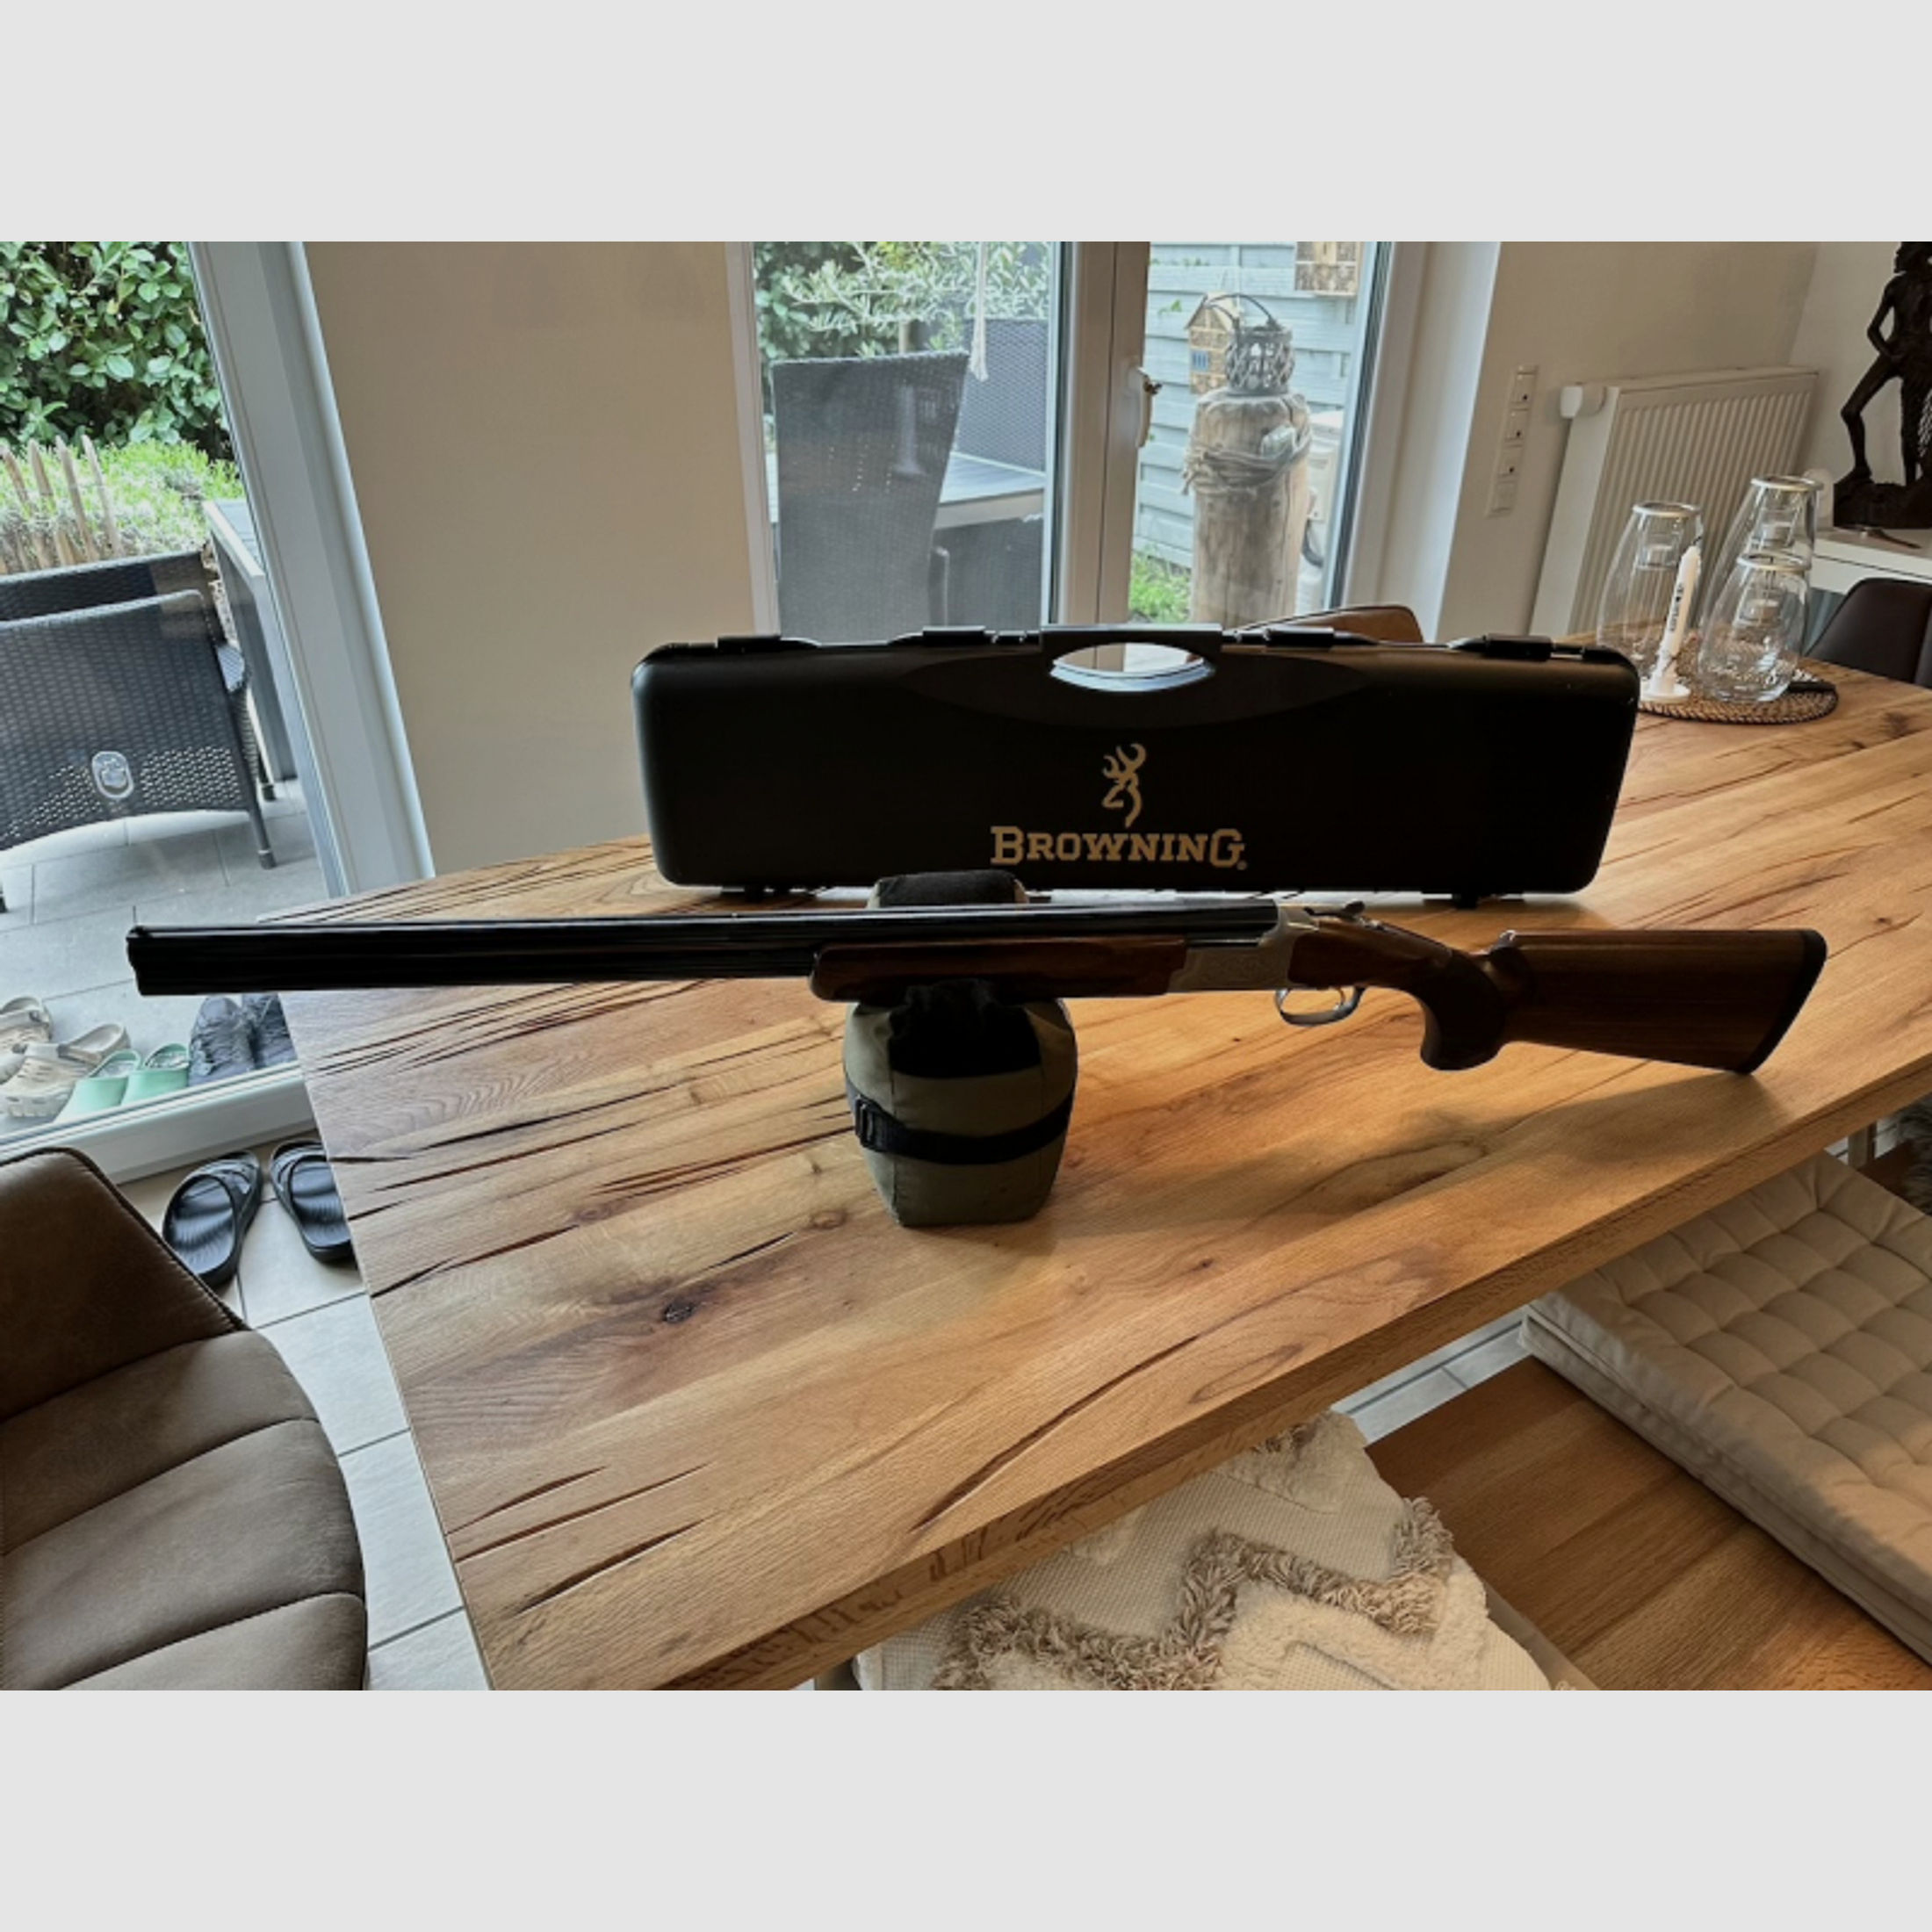 Browning B525 Trap One 12/70